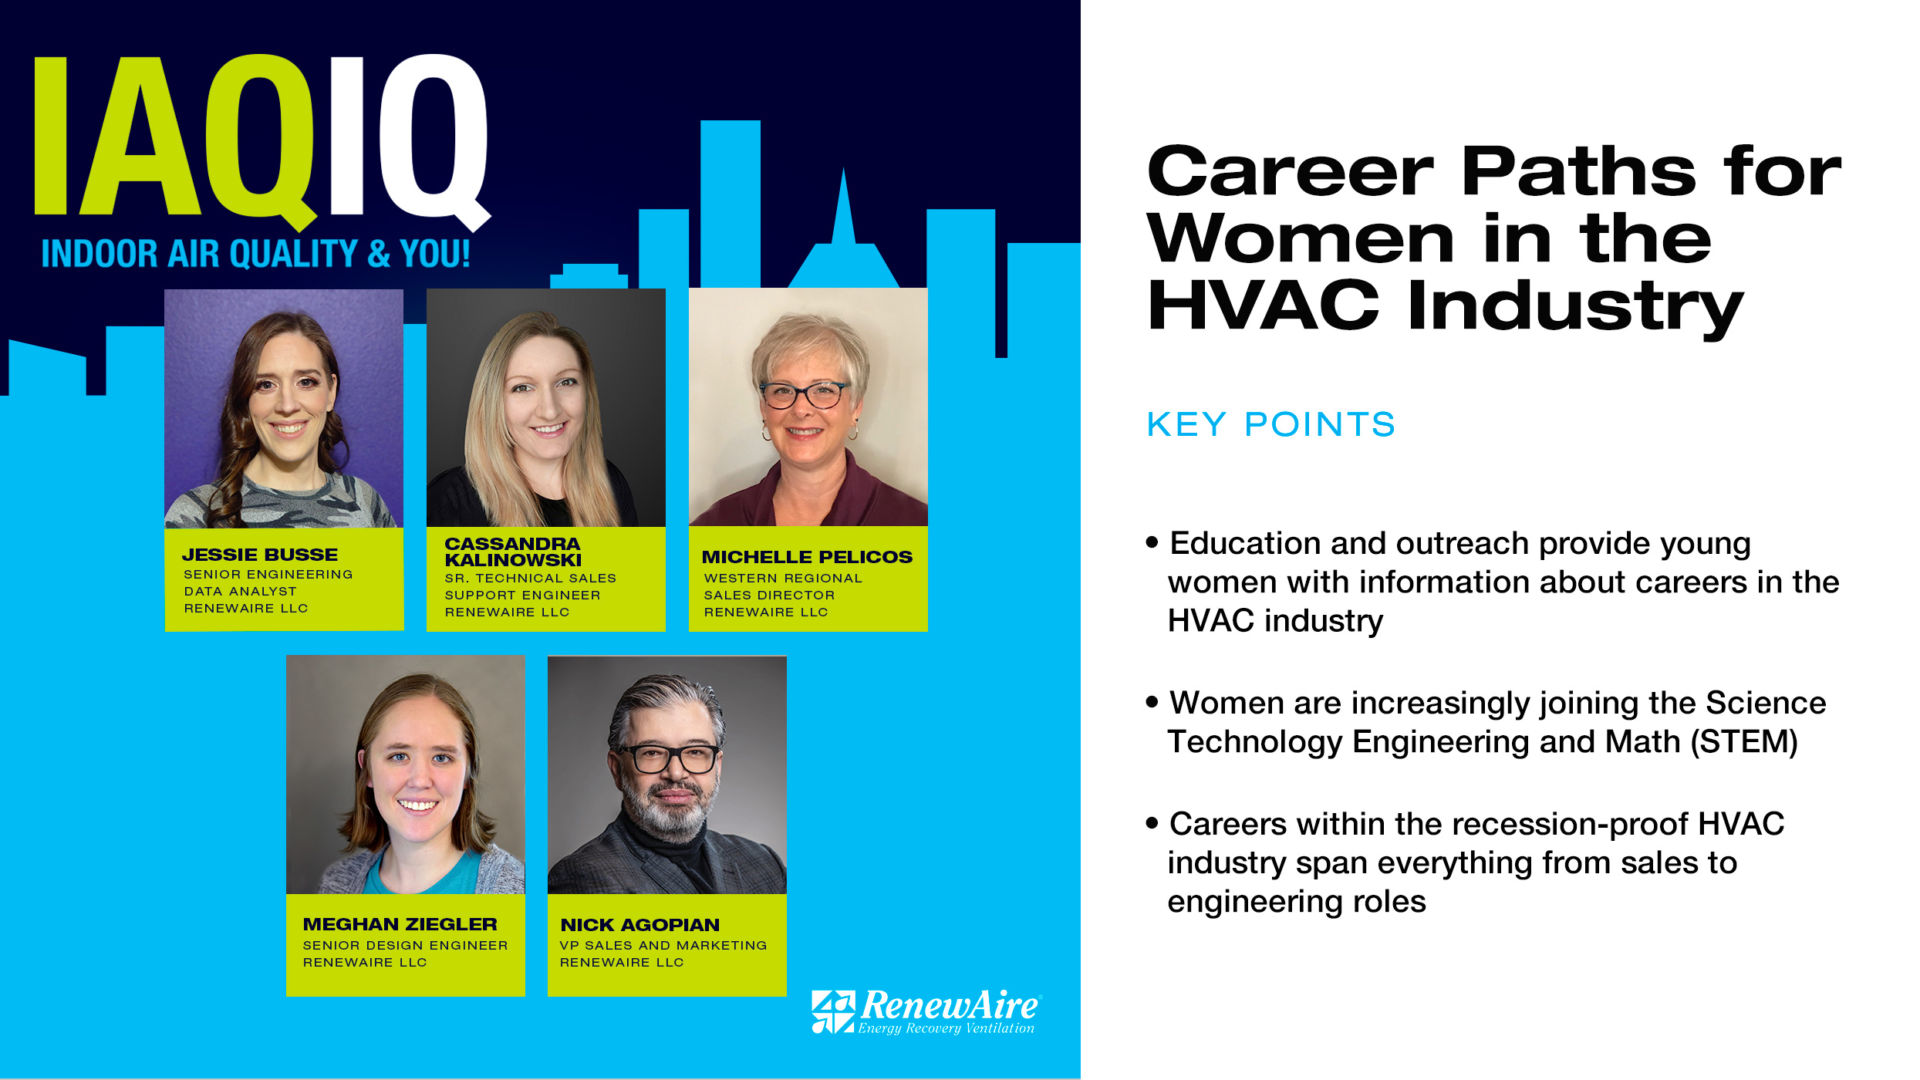 CAREER PATHS FOR WOMEN IN THE HVAC INDUSTRY